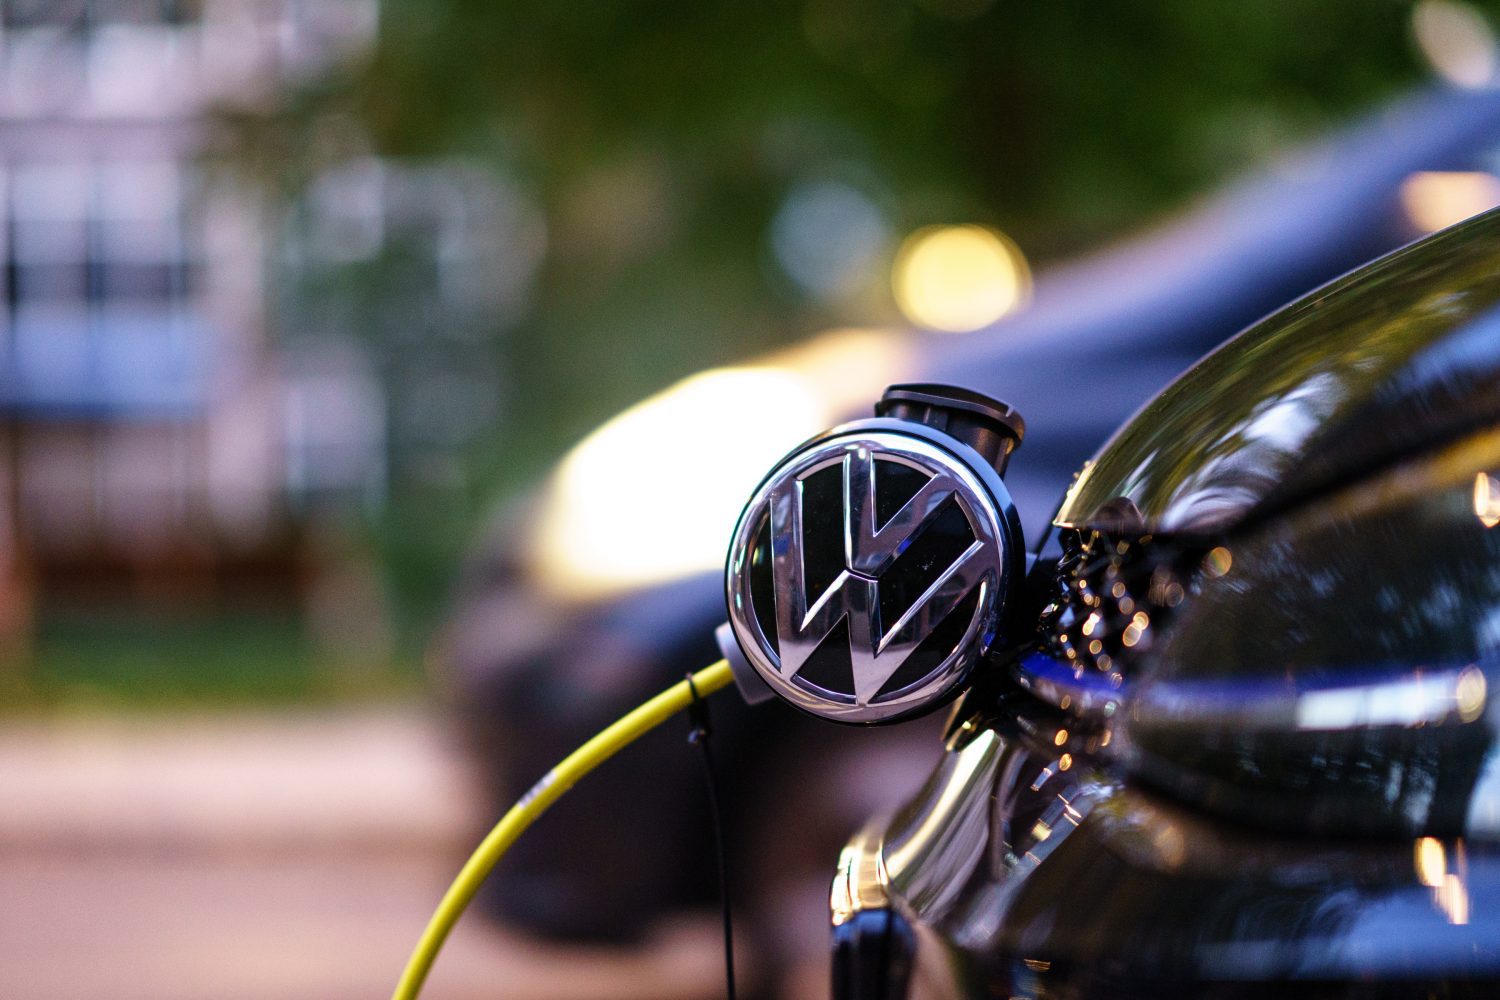 Volkswagen aims to launch an electric vehicle (EV) under $35,000 in the United States within the next two to four years.